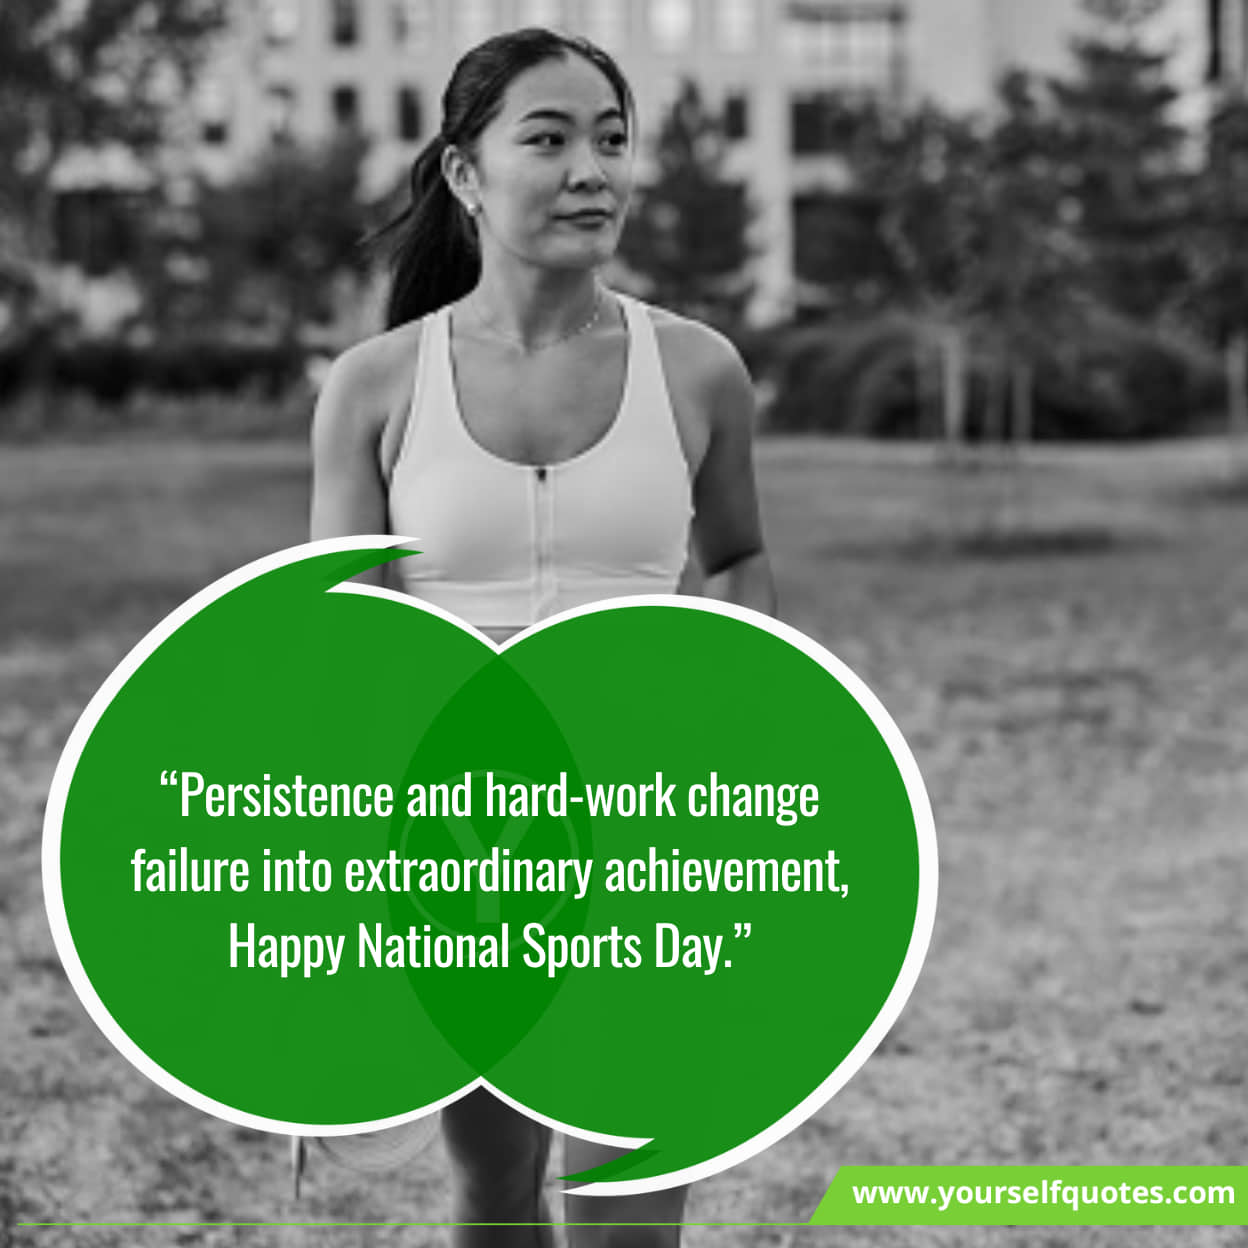 Best Famous Quotes For National Sports Day